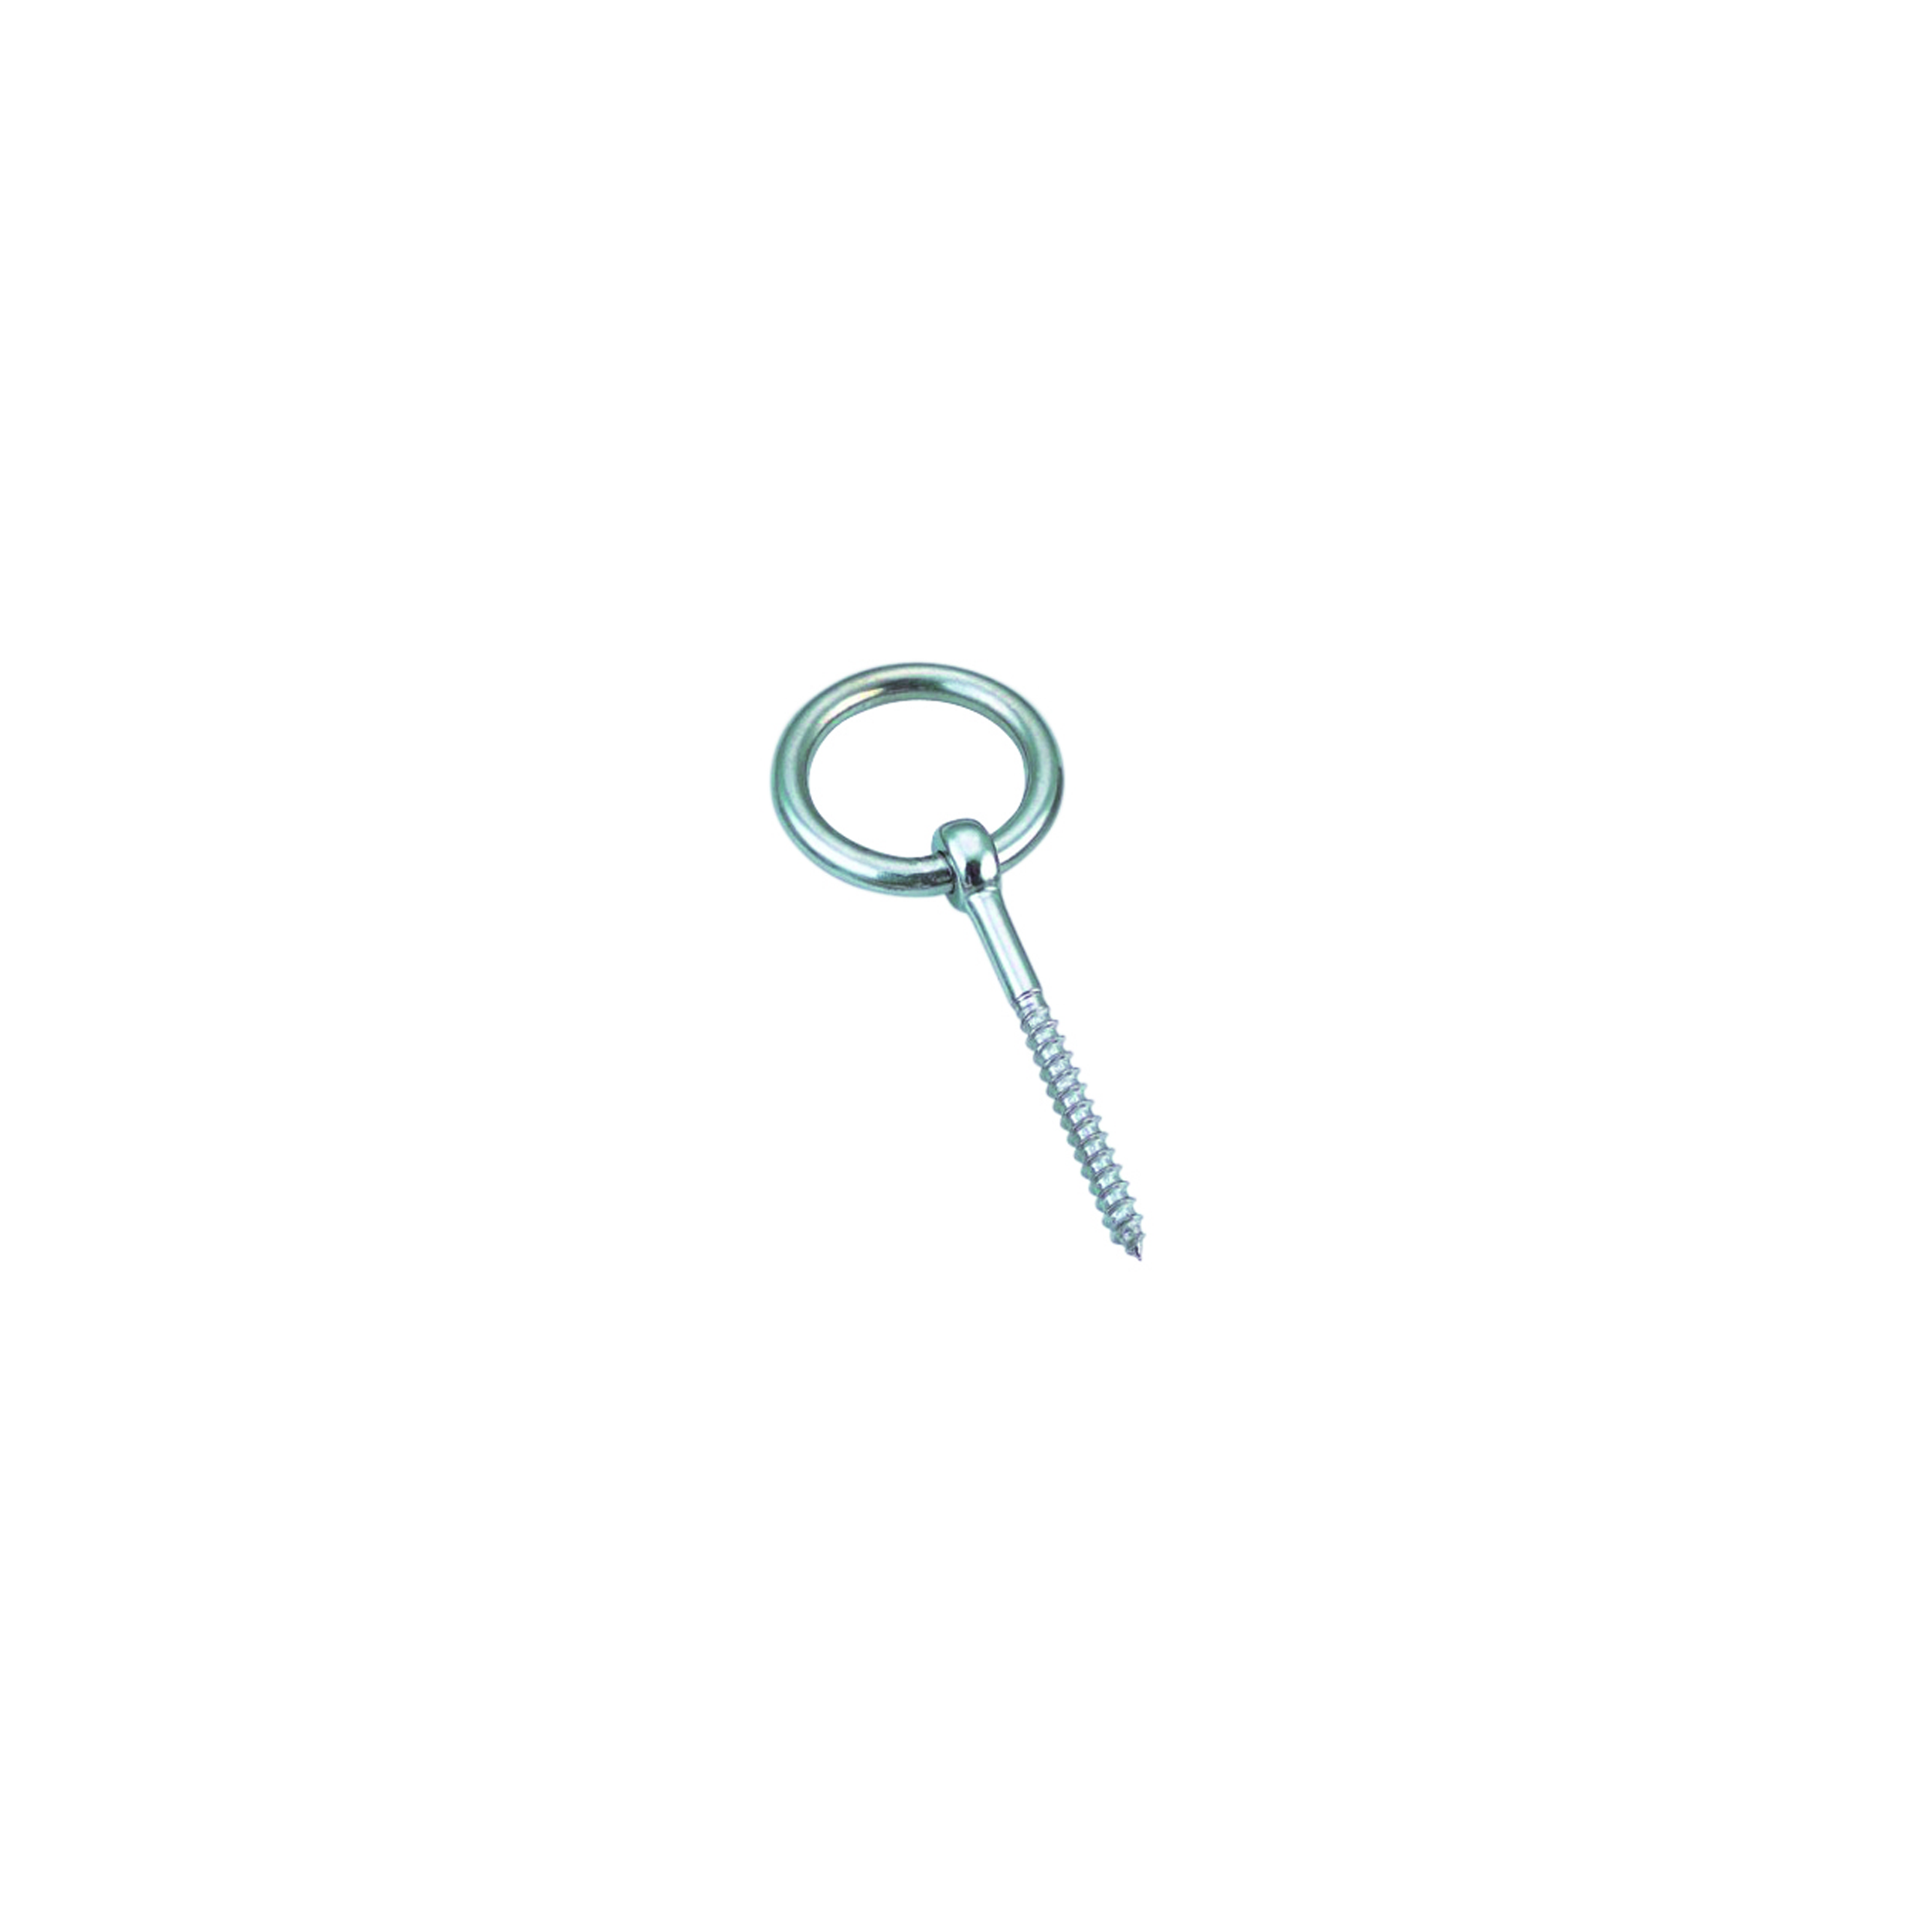 Eyebolt with wood thread and ring A4  bolt 4x45mm, ring 4x25mm